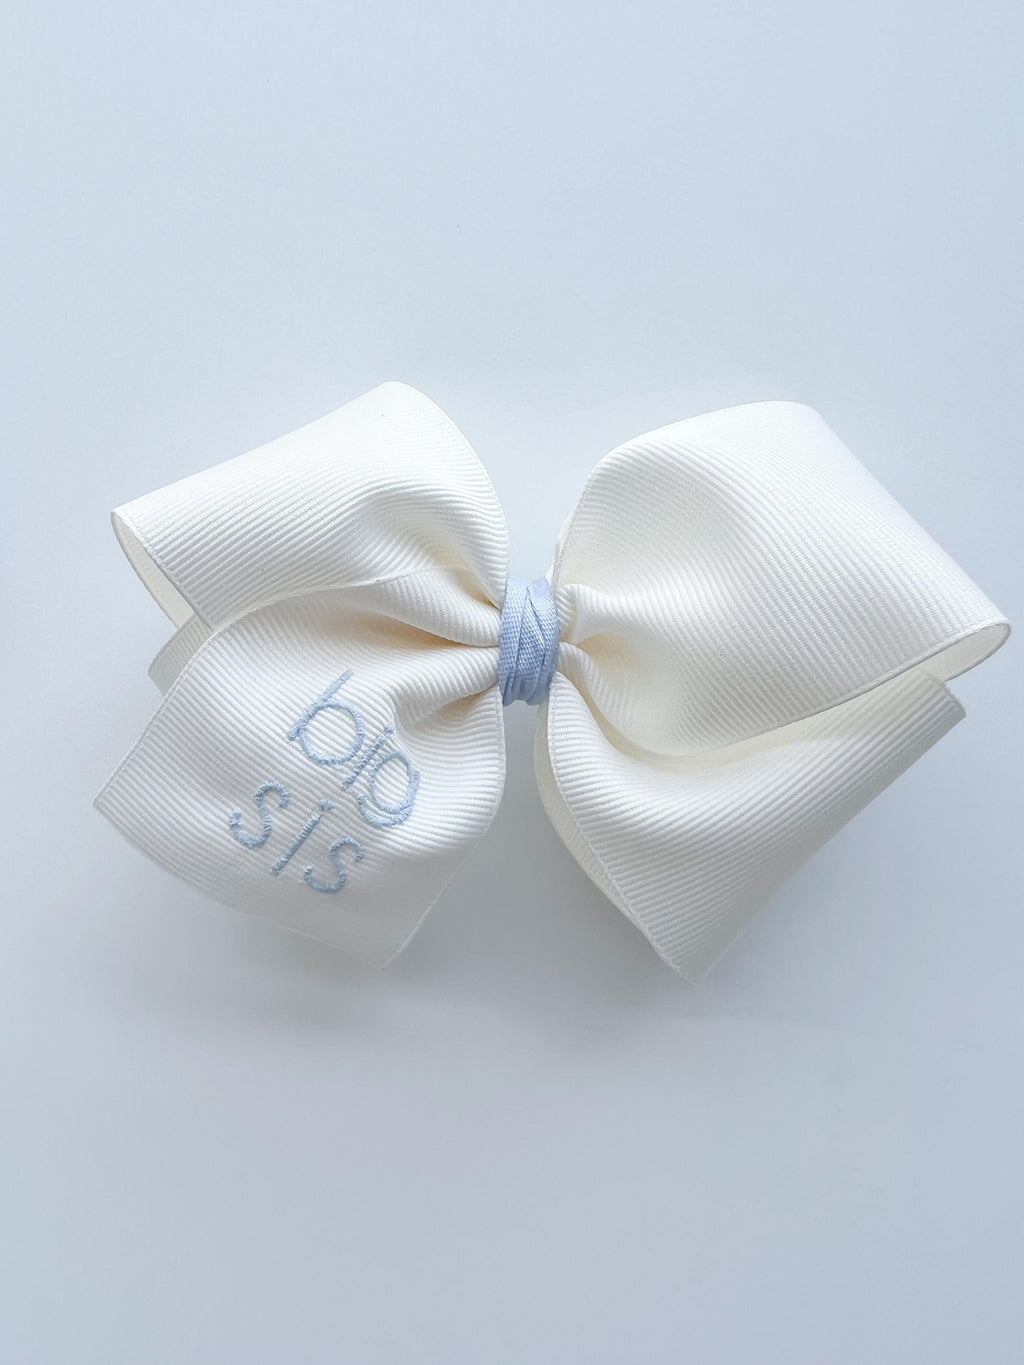 Gracie Bow - Big Sis | Nashville Bow Co. - Classic Hair Bows, Bow Ties, Basket Bows, Pacifier Clips, Wreath Sashes, Swaddle Bows. Classic Southern Charm.